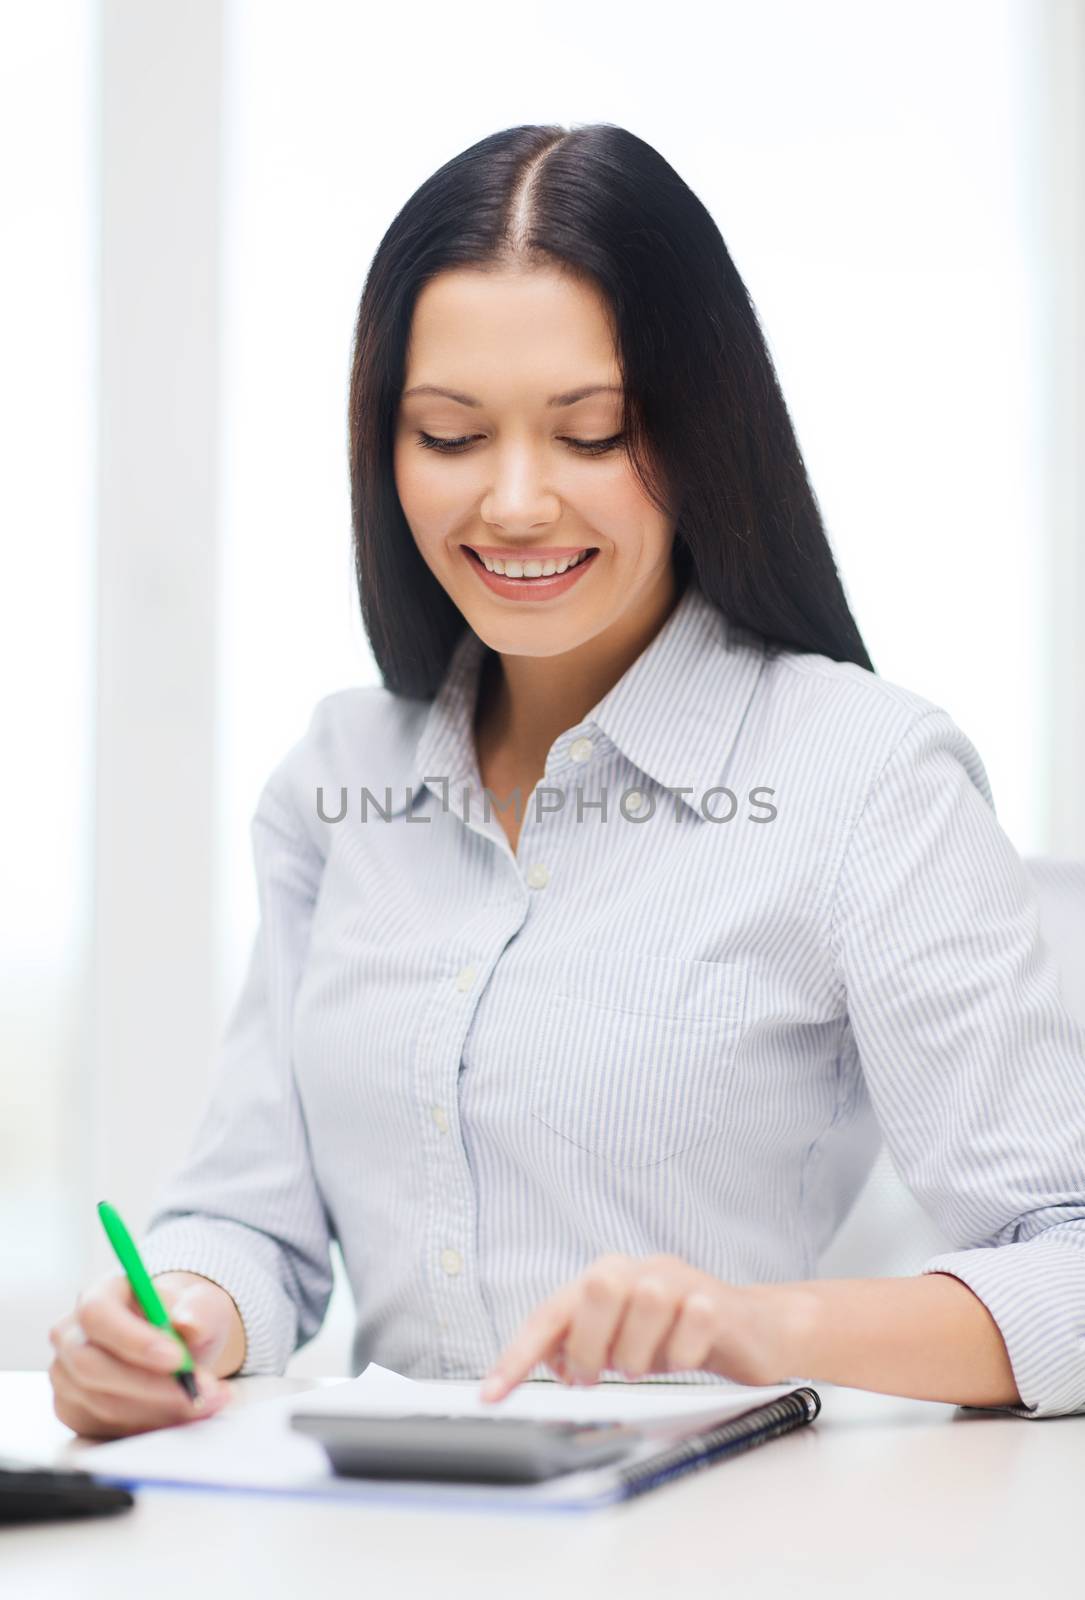 business, education and tax concept - smiling businesswoman or student working with calculator